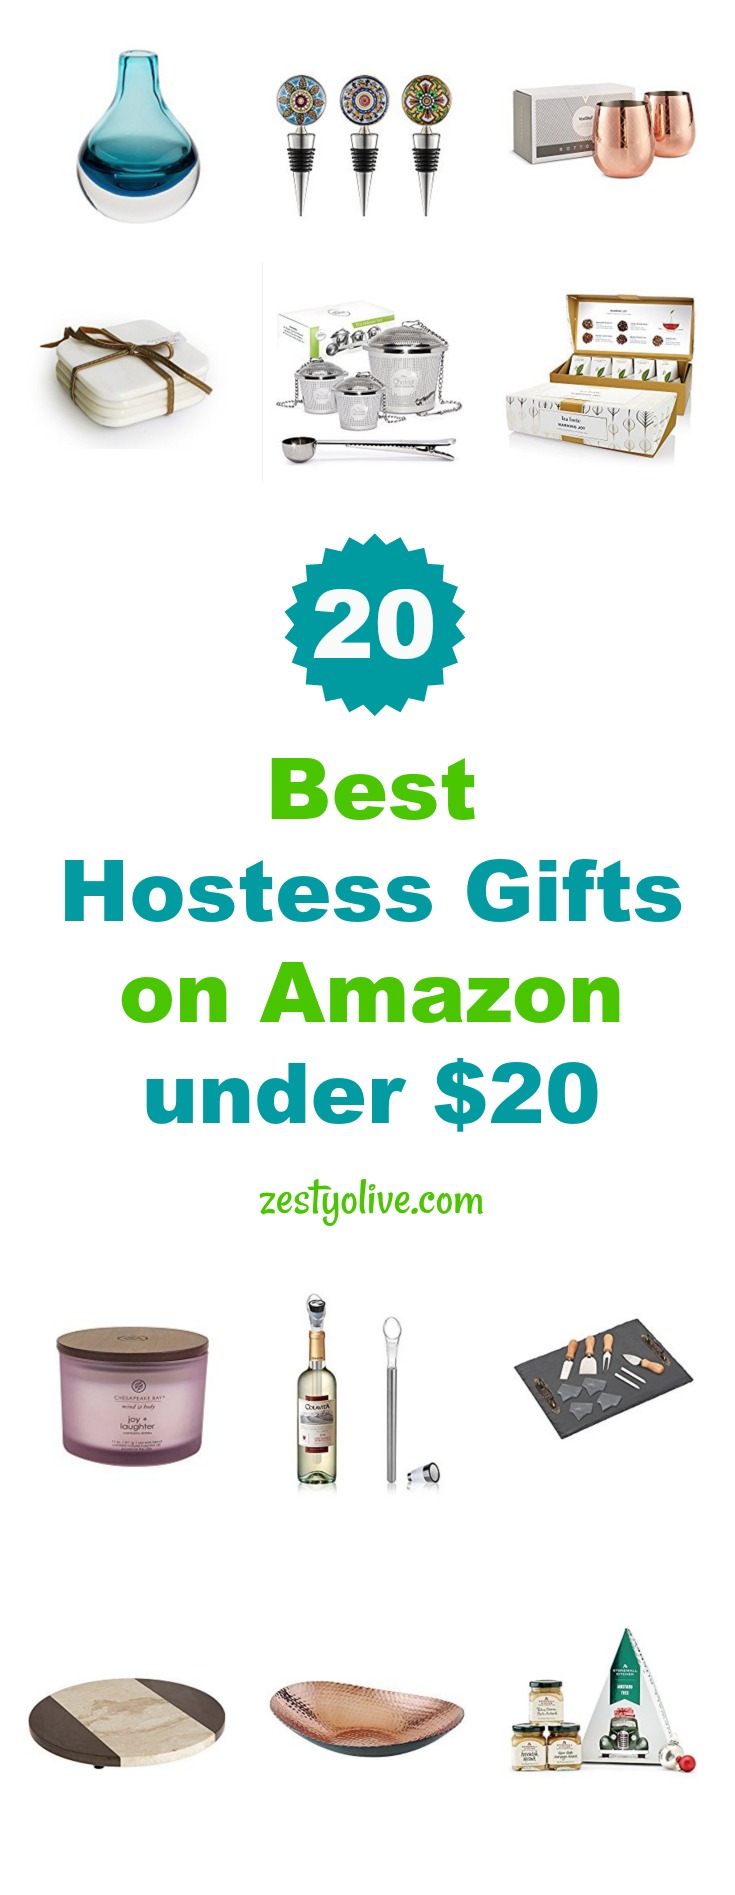 Searching for a last minute hostess gift? Here are 20 Best Hostess Gifts Under $20 that will delight your recipient.